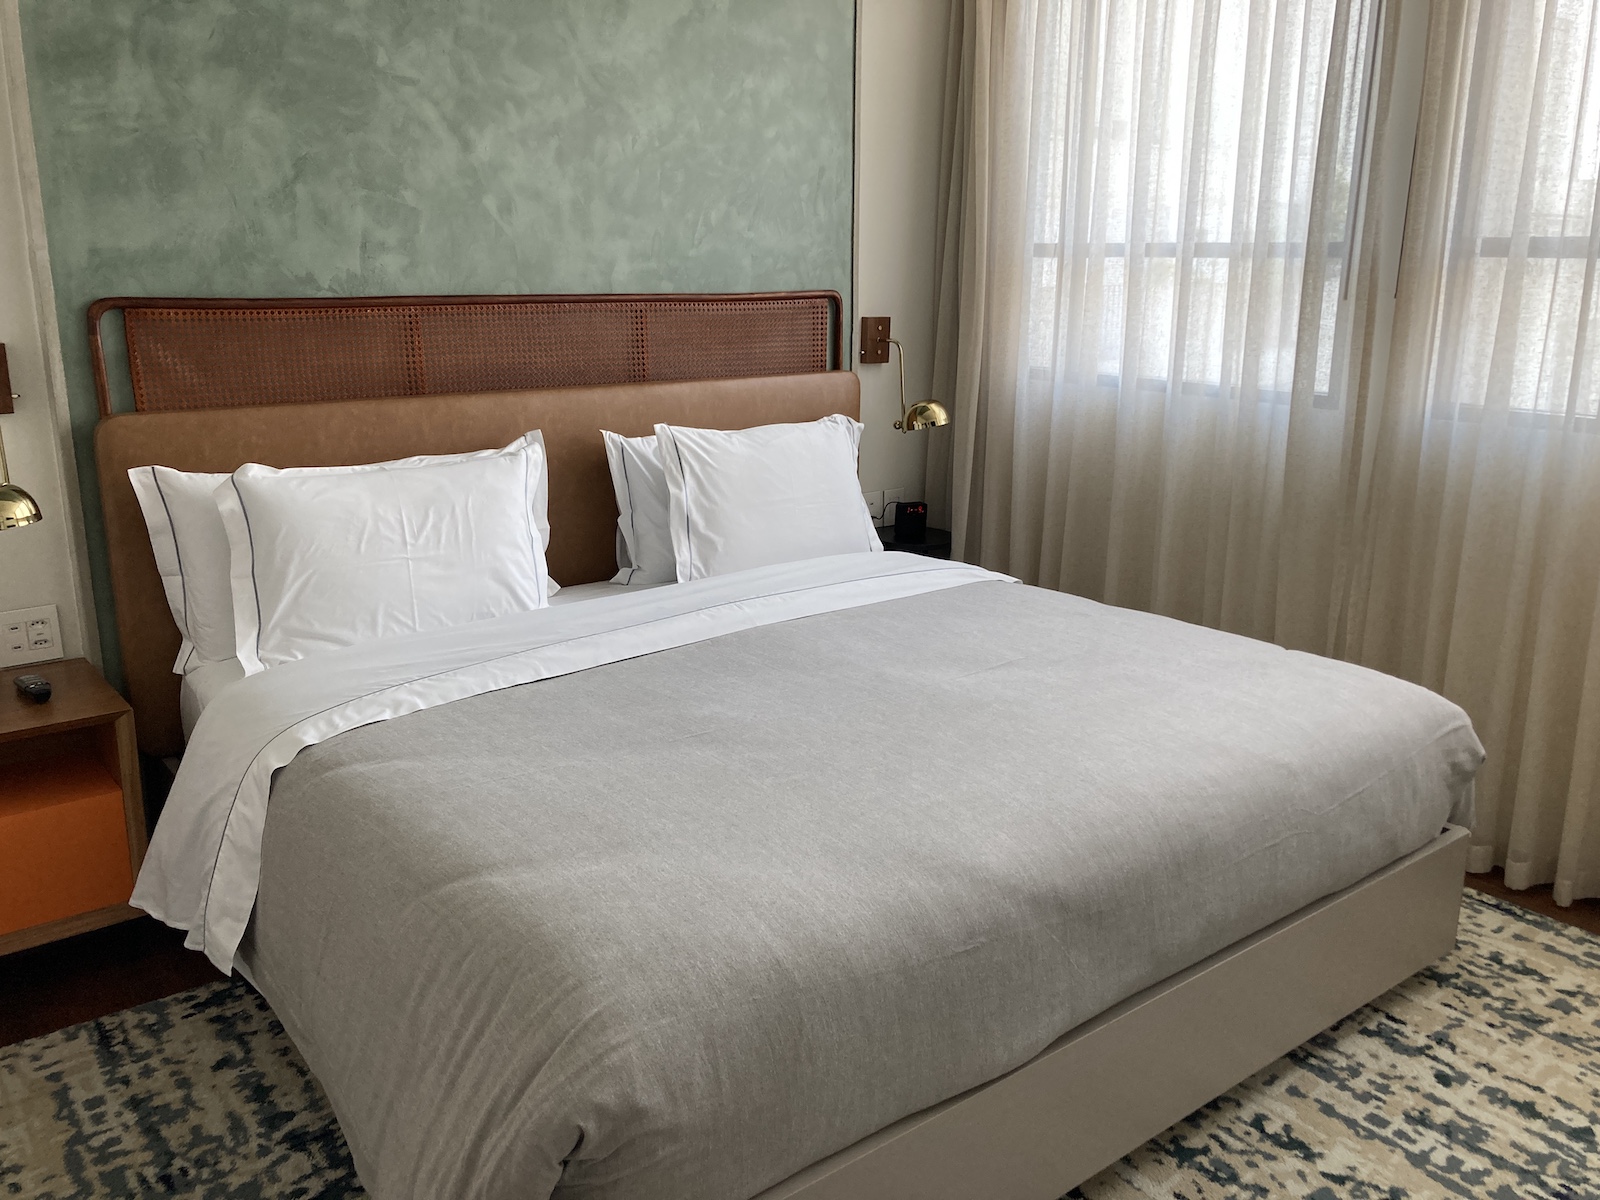 Hotel Review: Canopy by Hilton São Paulo Jardins - A Lot of Positives